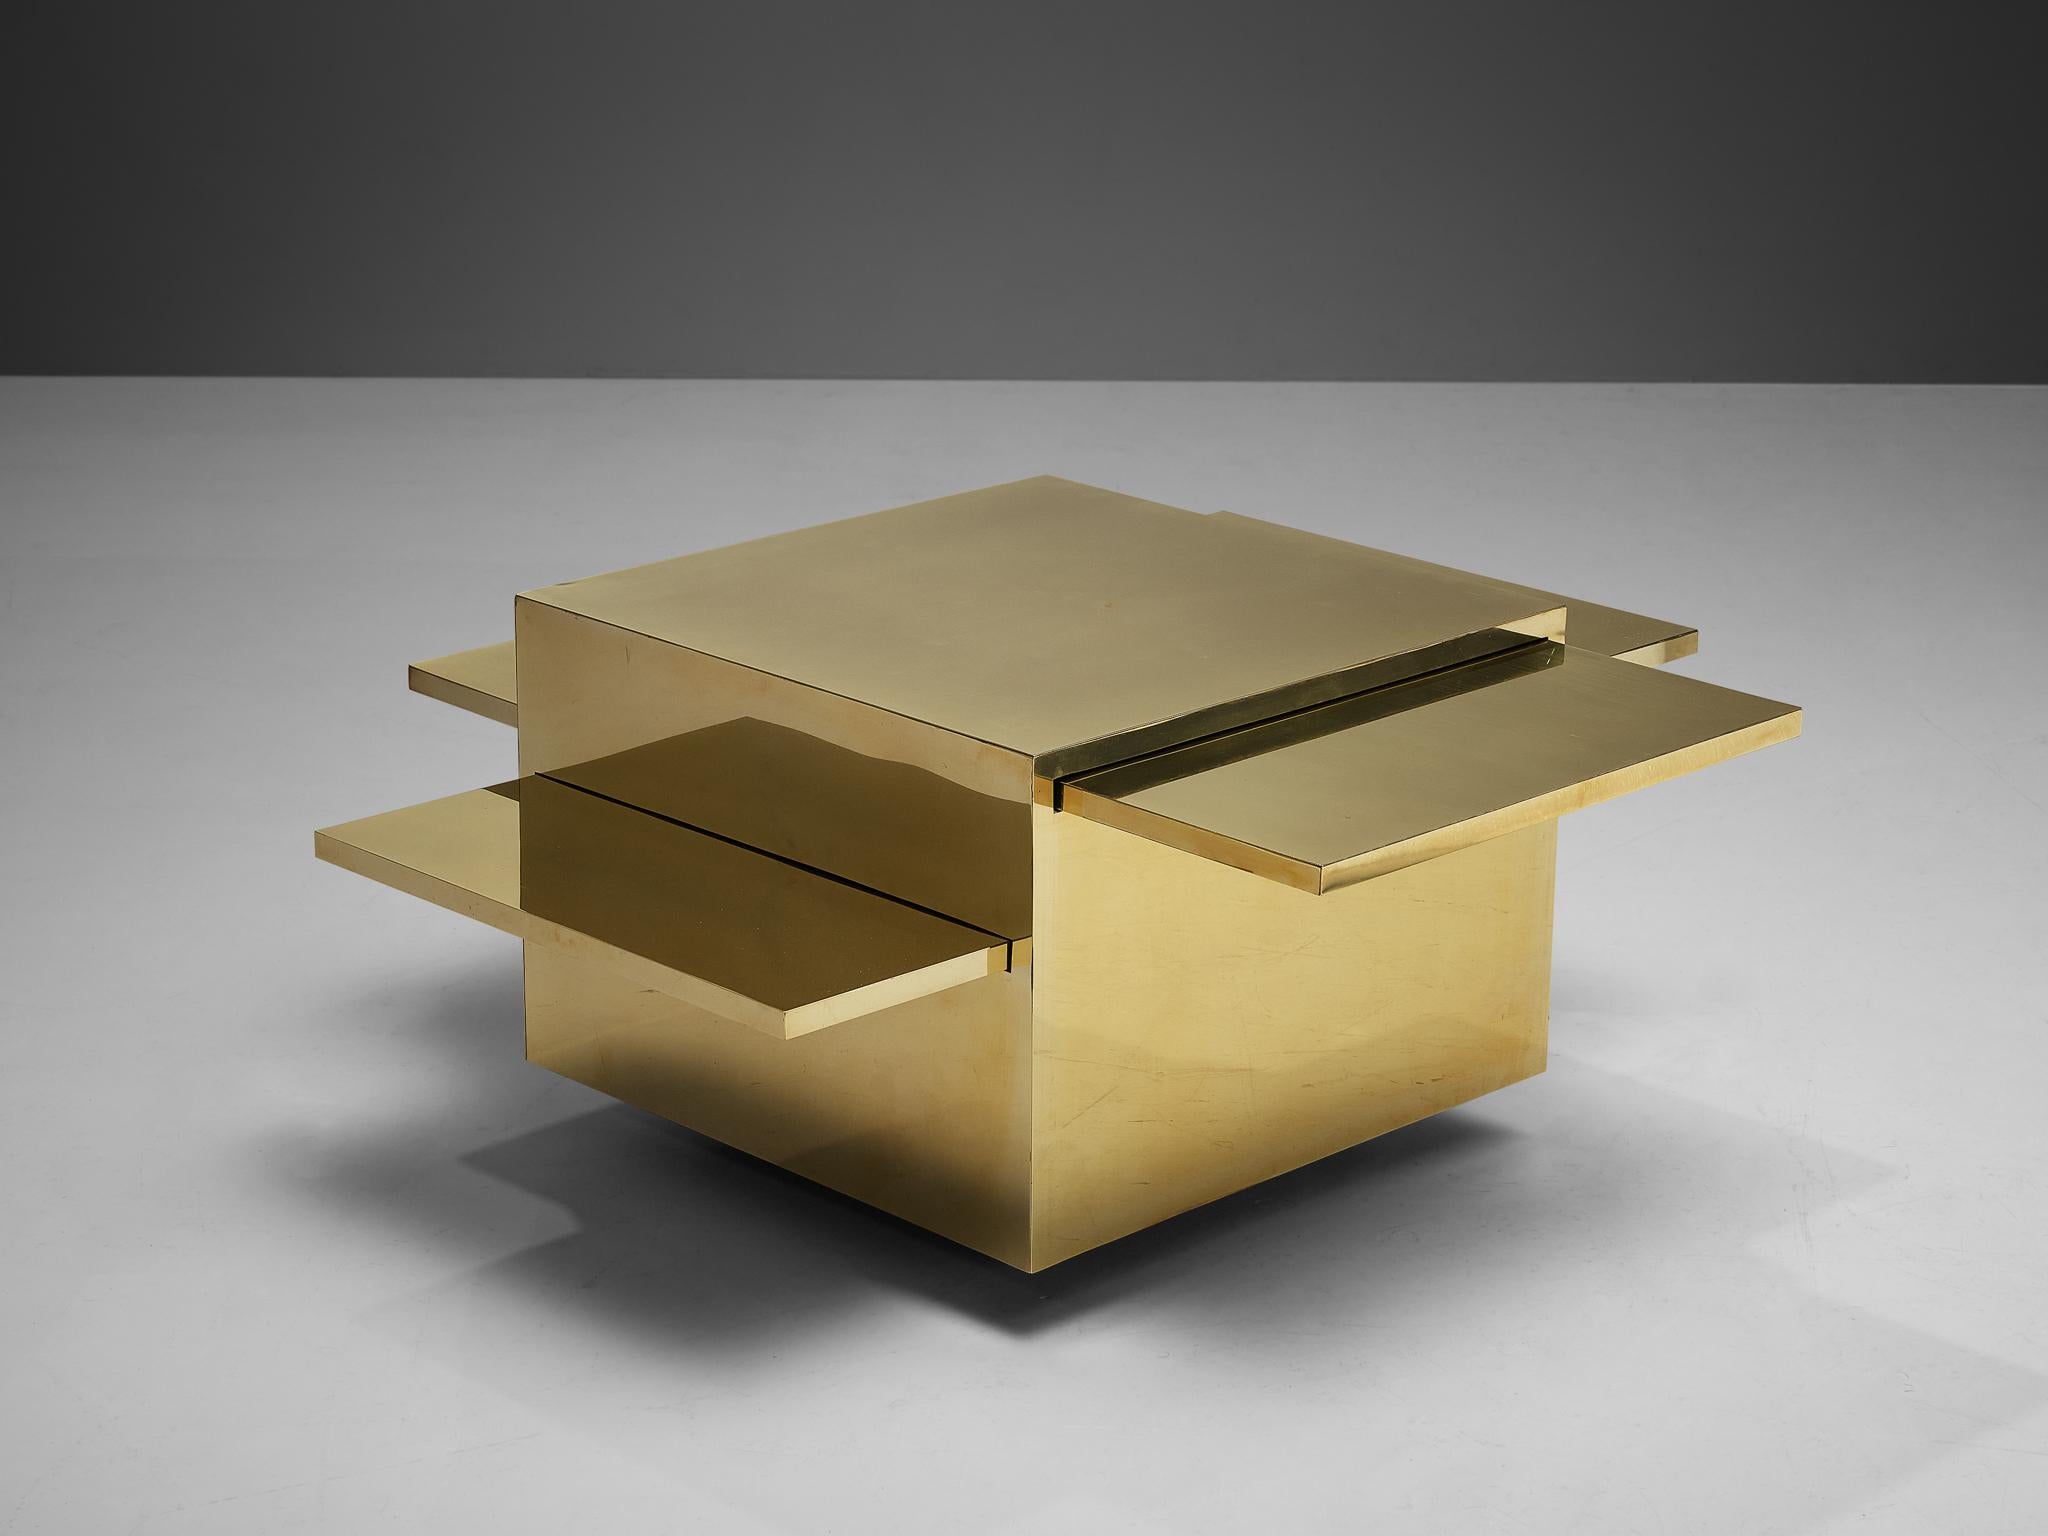 Gabriella Crespi, 'Cubo Magico' coffee table, brass, Italy, 1970.

The ‘Cubo Magico’ was designed by Gabriella Crespi as part of the 'Plurimi’ series. This line got off the ground in the early 1970s and obtained its name ‘Plurimi’ as tribute to